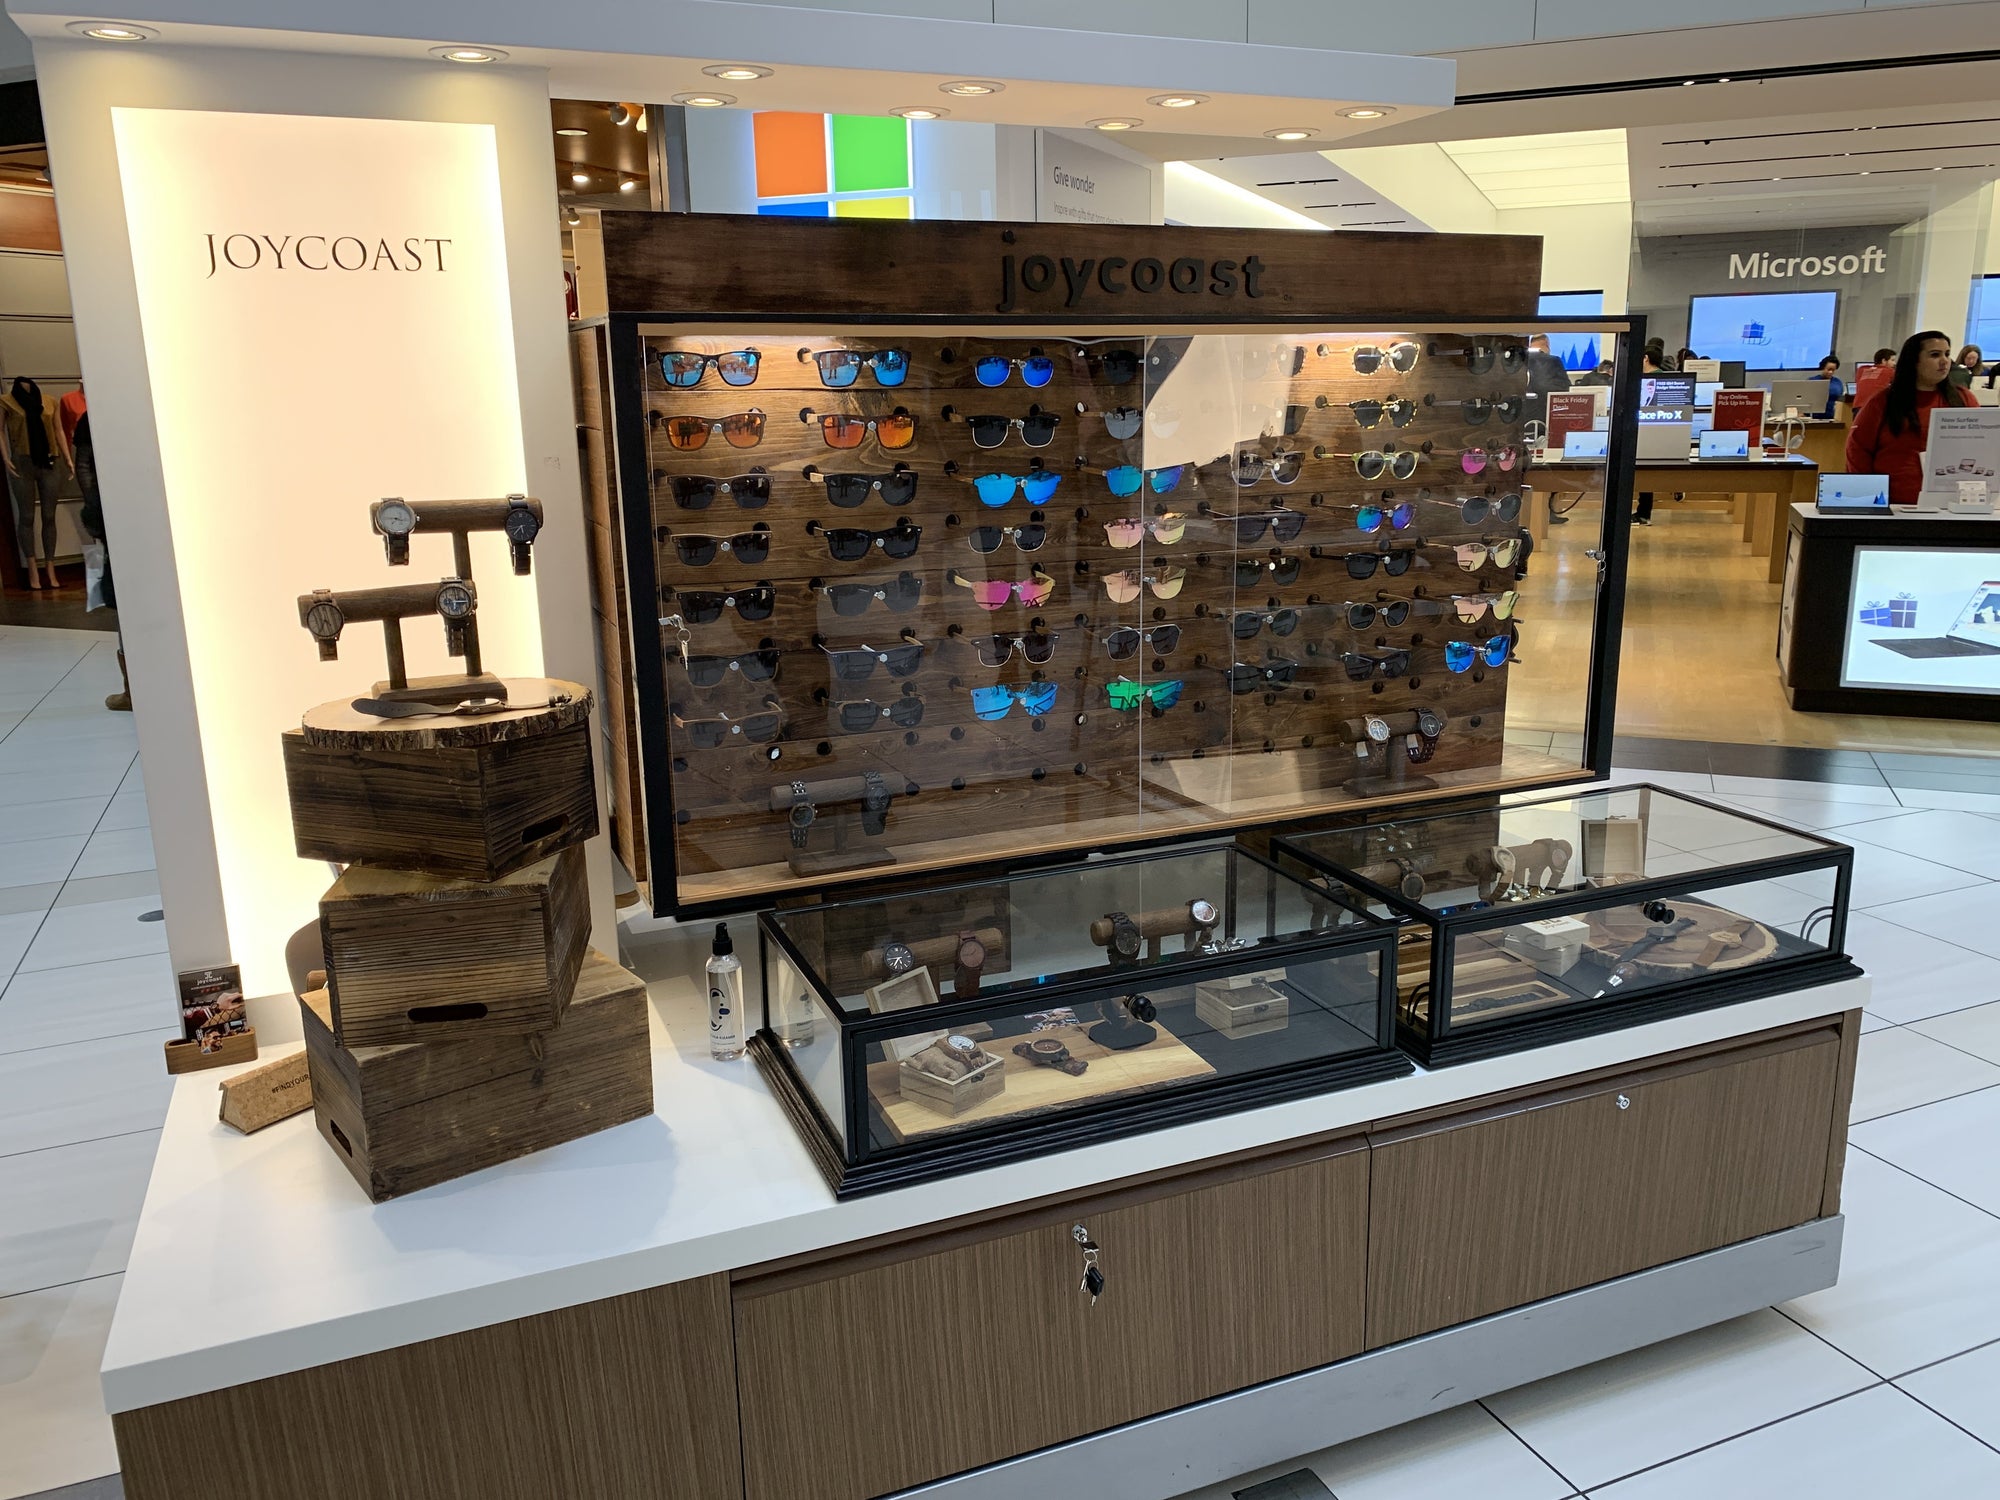 Announcing Joycoast's New Holiday Pop up Shop at Woodfield Mall in Schaumburg, IL!